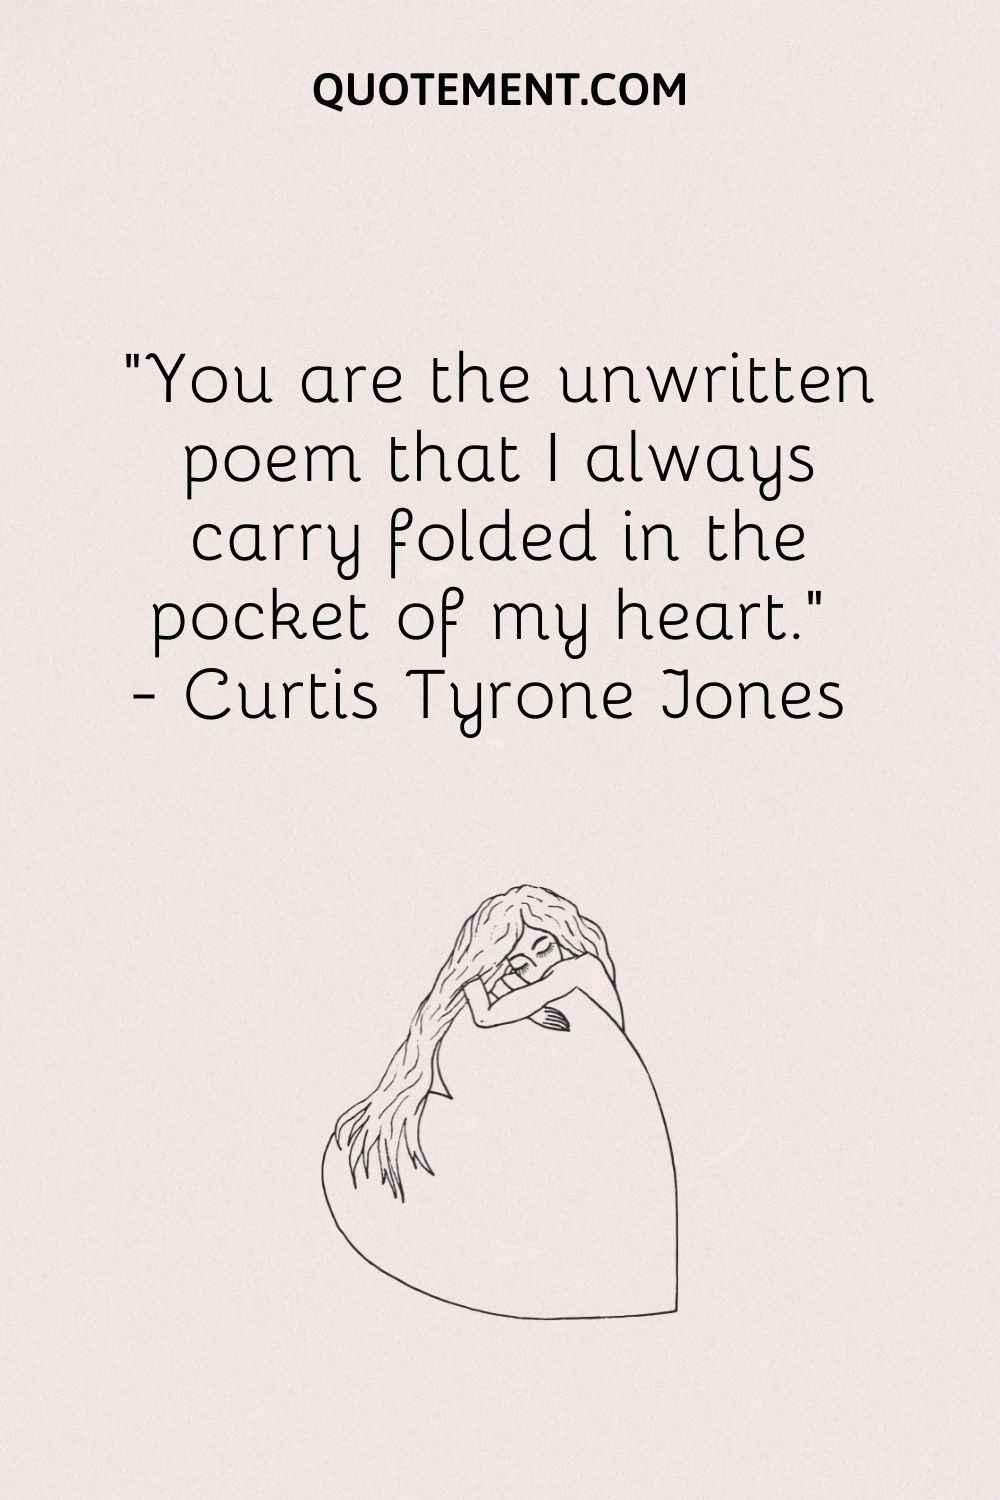 You are the unwritten poem that I always carry folded in the pocket of my heart.